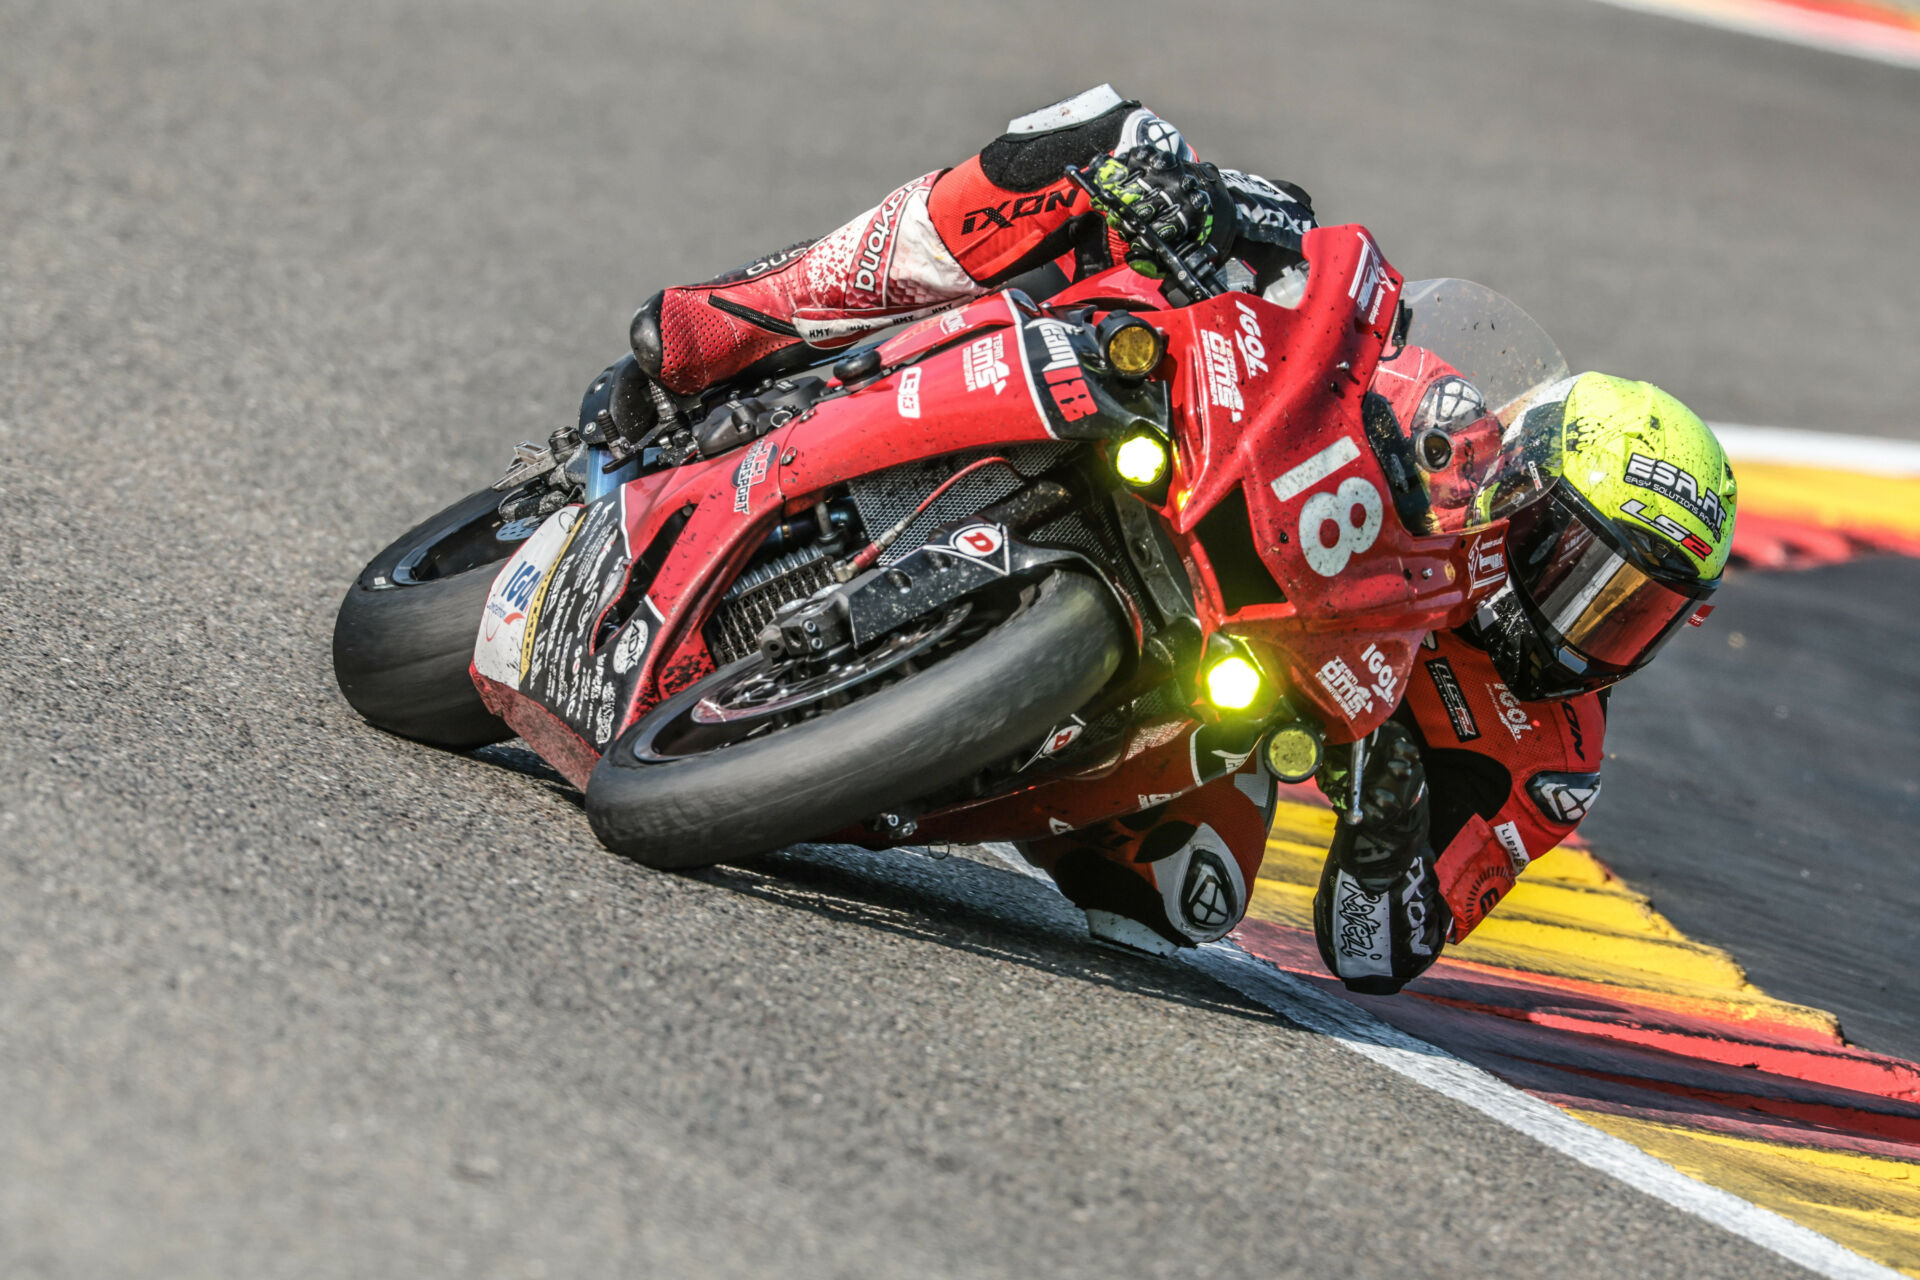 Team 18 Sapeurs Pompiers CMS Motostore (18) in action in 2022. Photo courtesy FIM EWC.